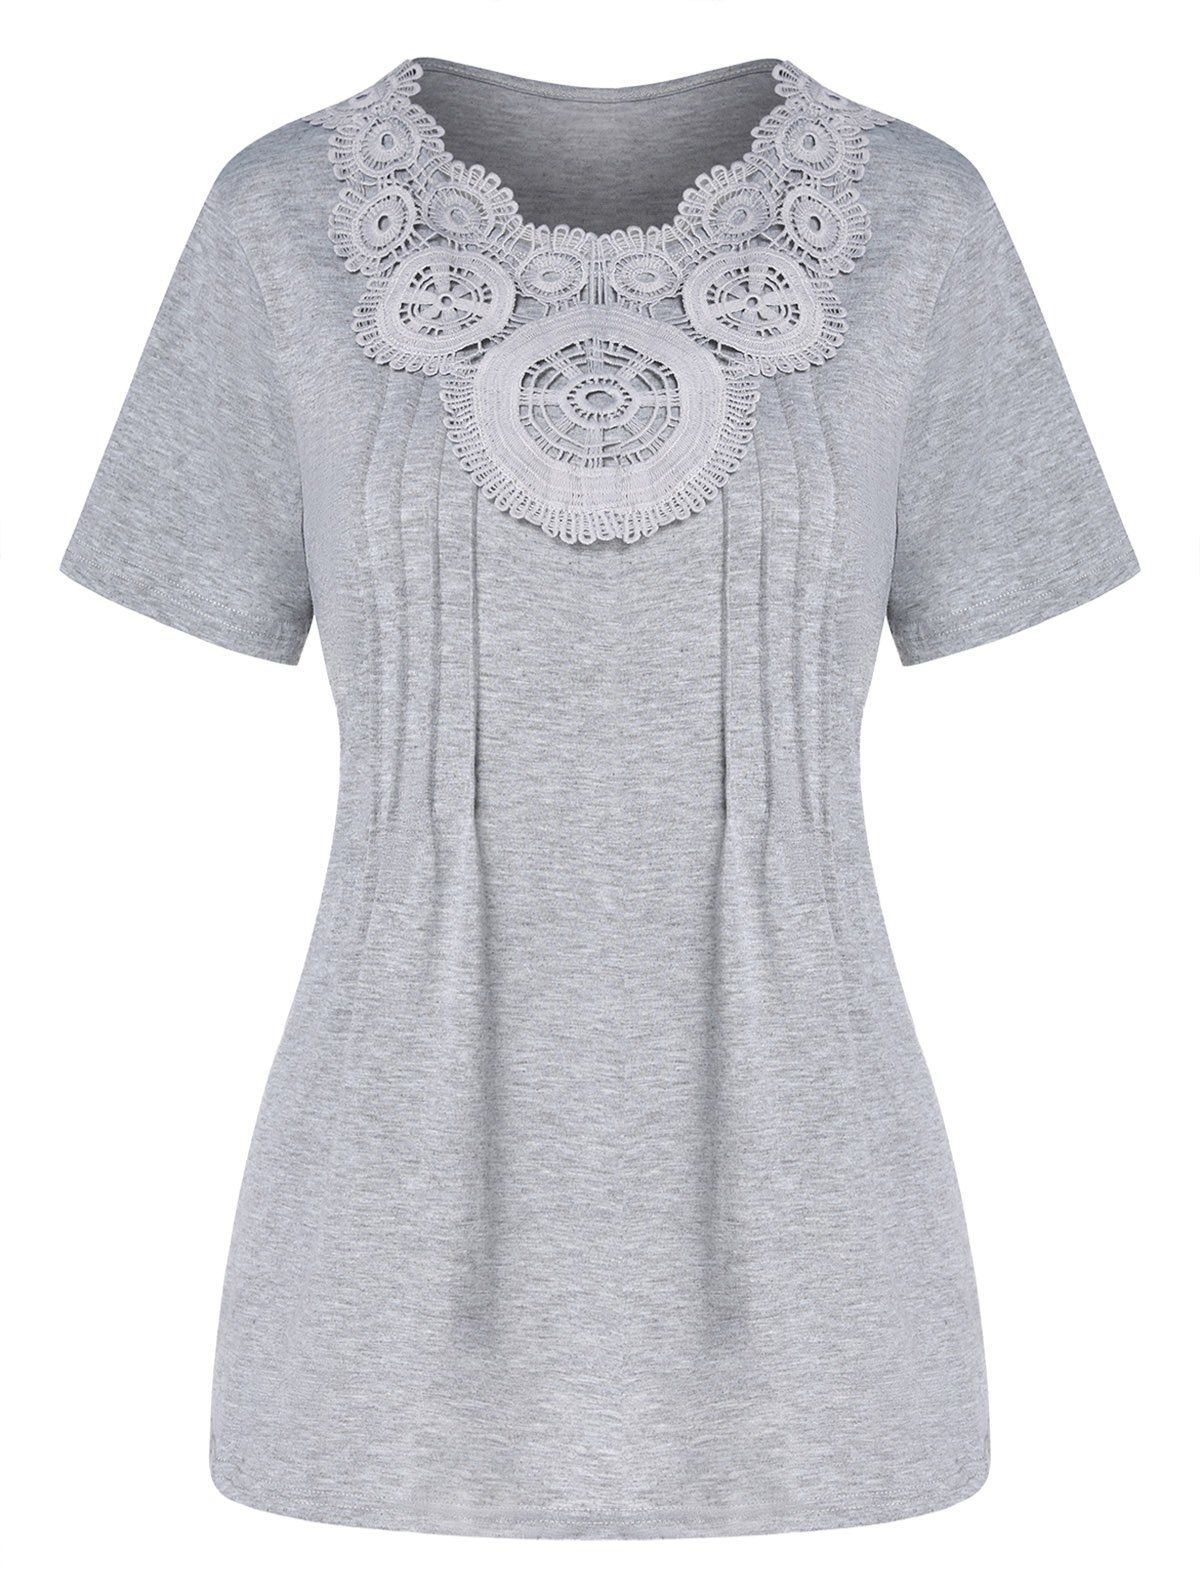 Heather T Shirt Hollow Out Geometric Lace Panel Pintuck Summer Casual Top - LIGHT GRAY 3XL